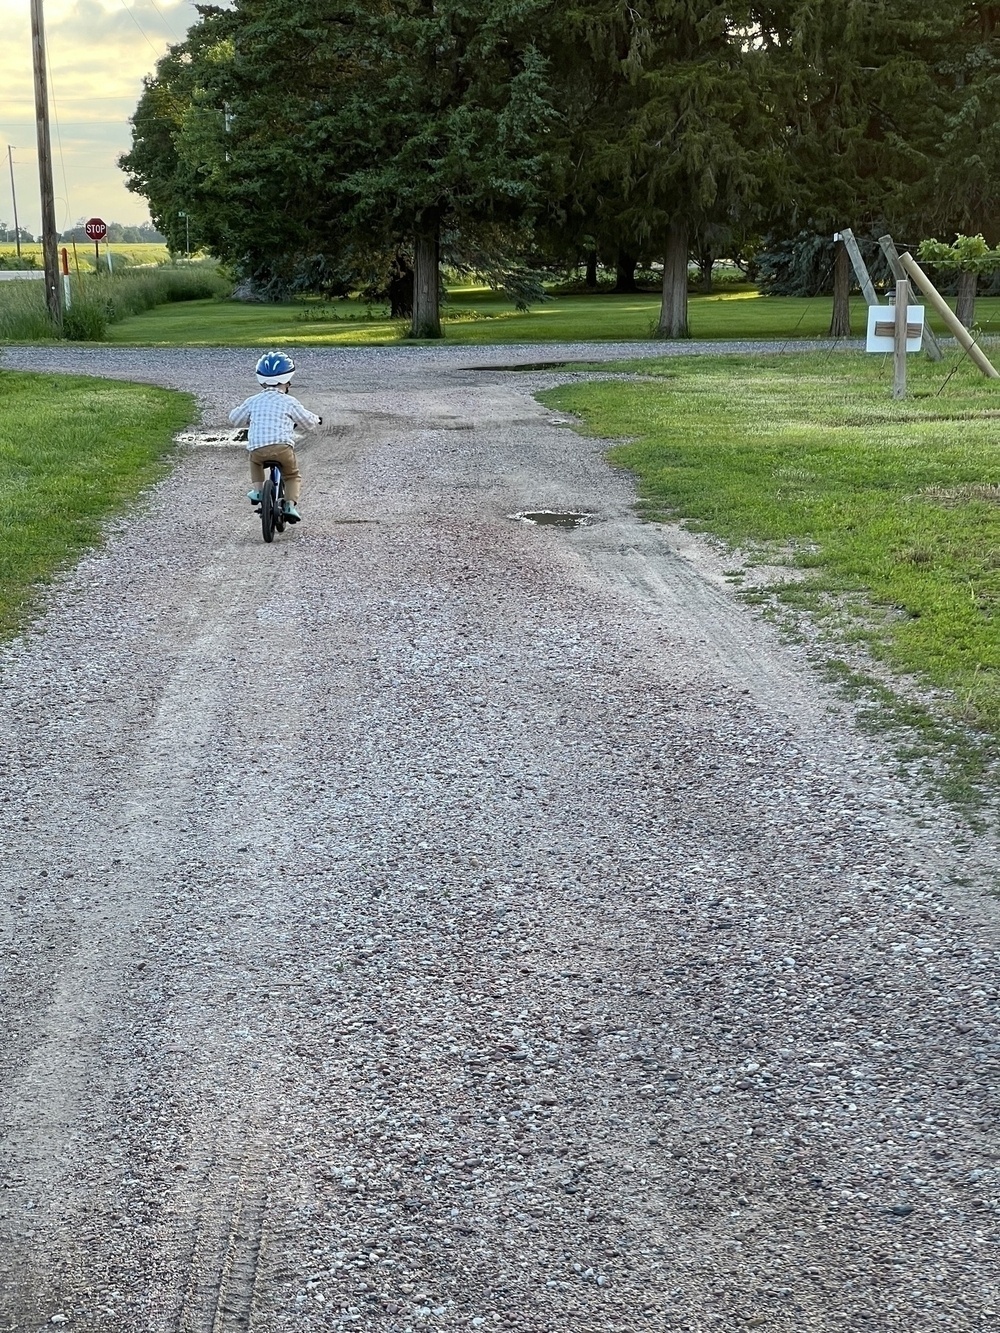 my almost 4 year old son, riding his bike on a gravel road after we installed pedals